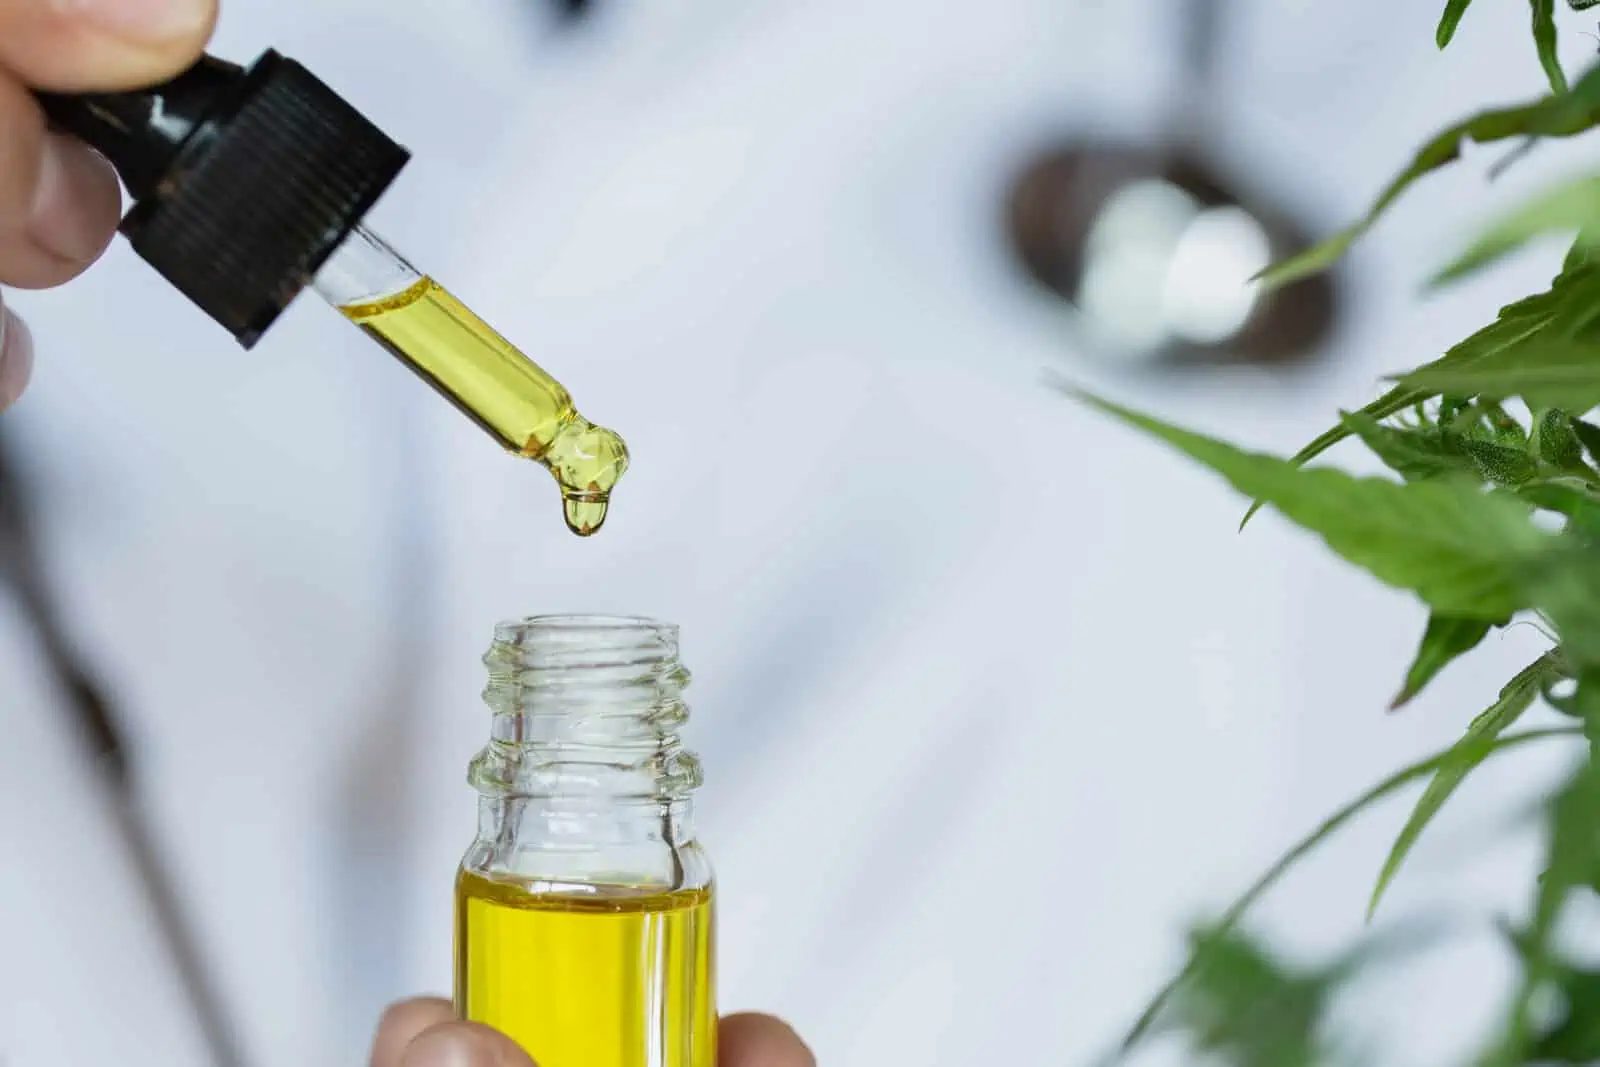 How to Extract CBD From Hemp: Hemp Extraction at Home and in the Lab